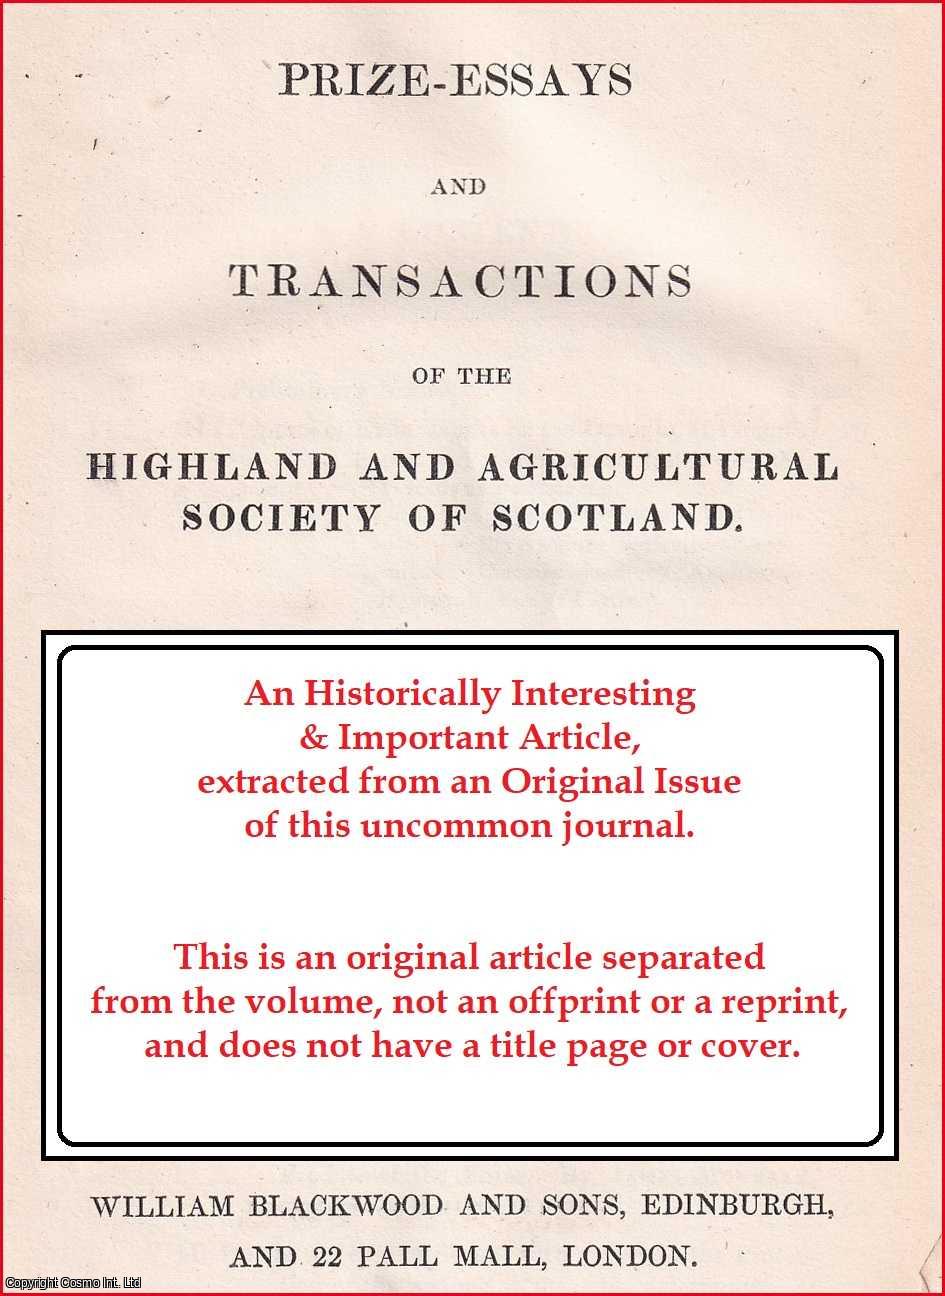 Mr. James Carmichael, Raploch Farm, Stirlingshire. - The Principal Limestone Quarries of Scotland : the Principal Marble, Slate, Sandstone & Greenstone Quarries in Scotland. A complete 2 part uncommon original article from the Prize Essays and Transactions of the Highland Society of Scotland, 1837.